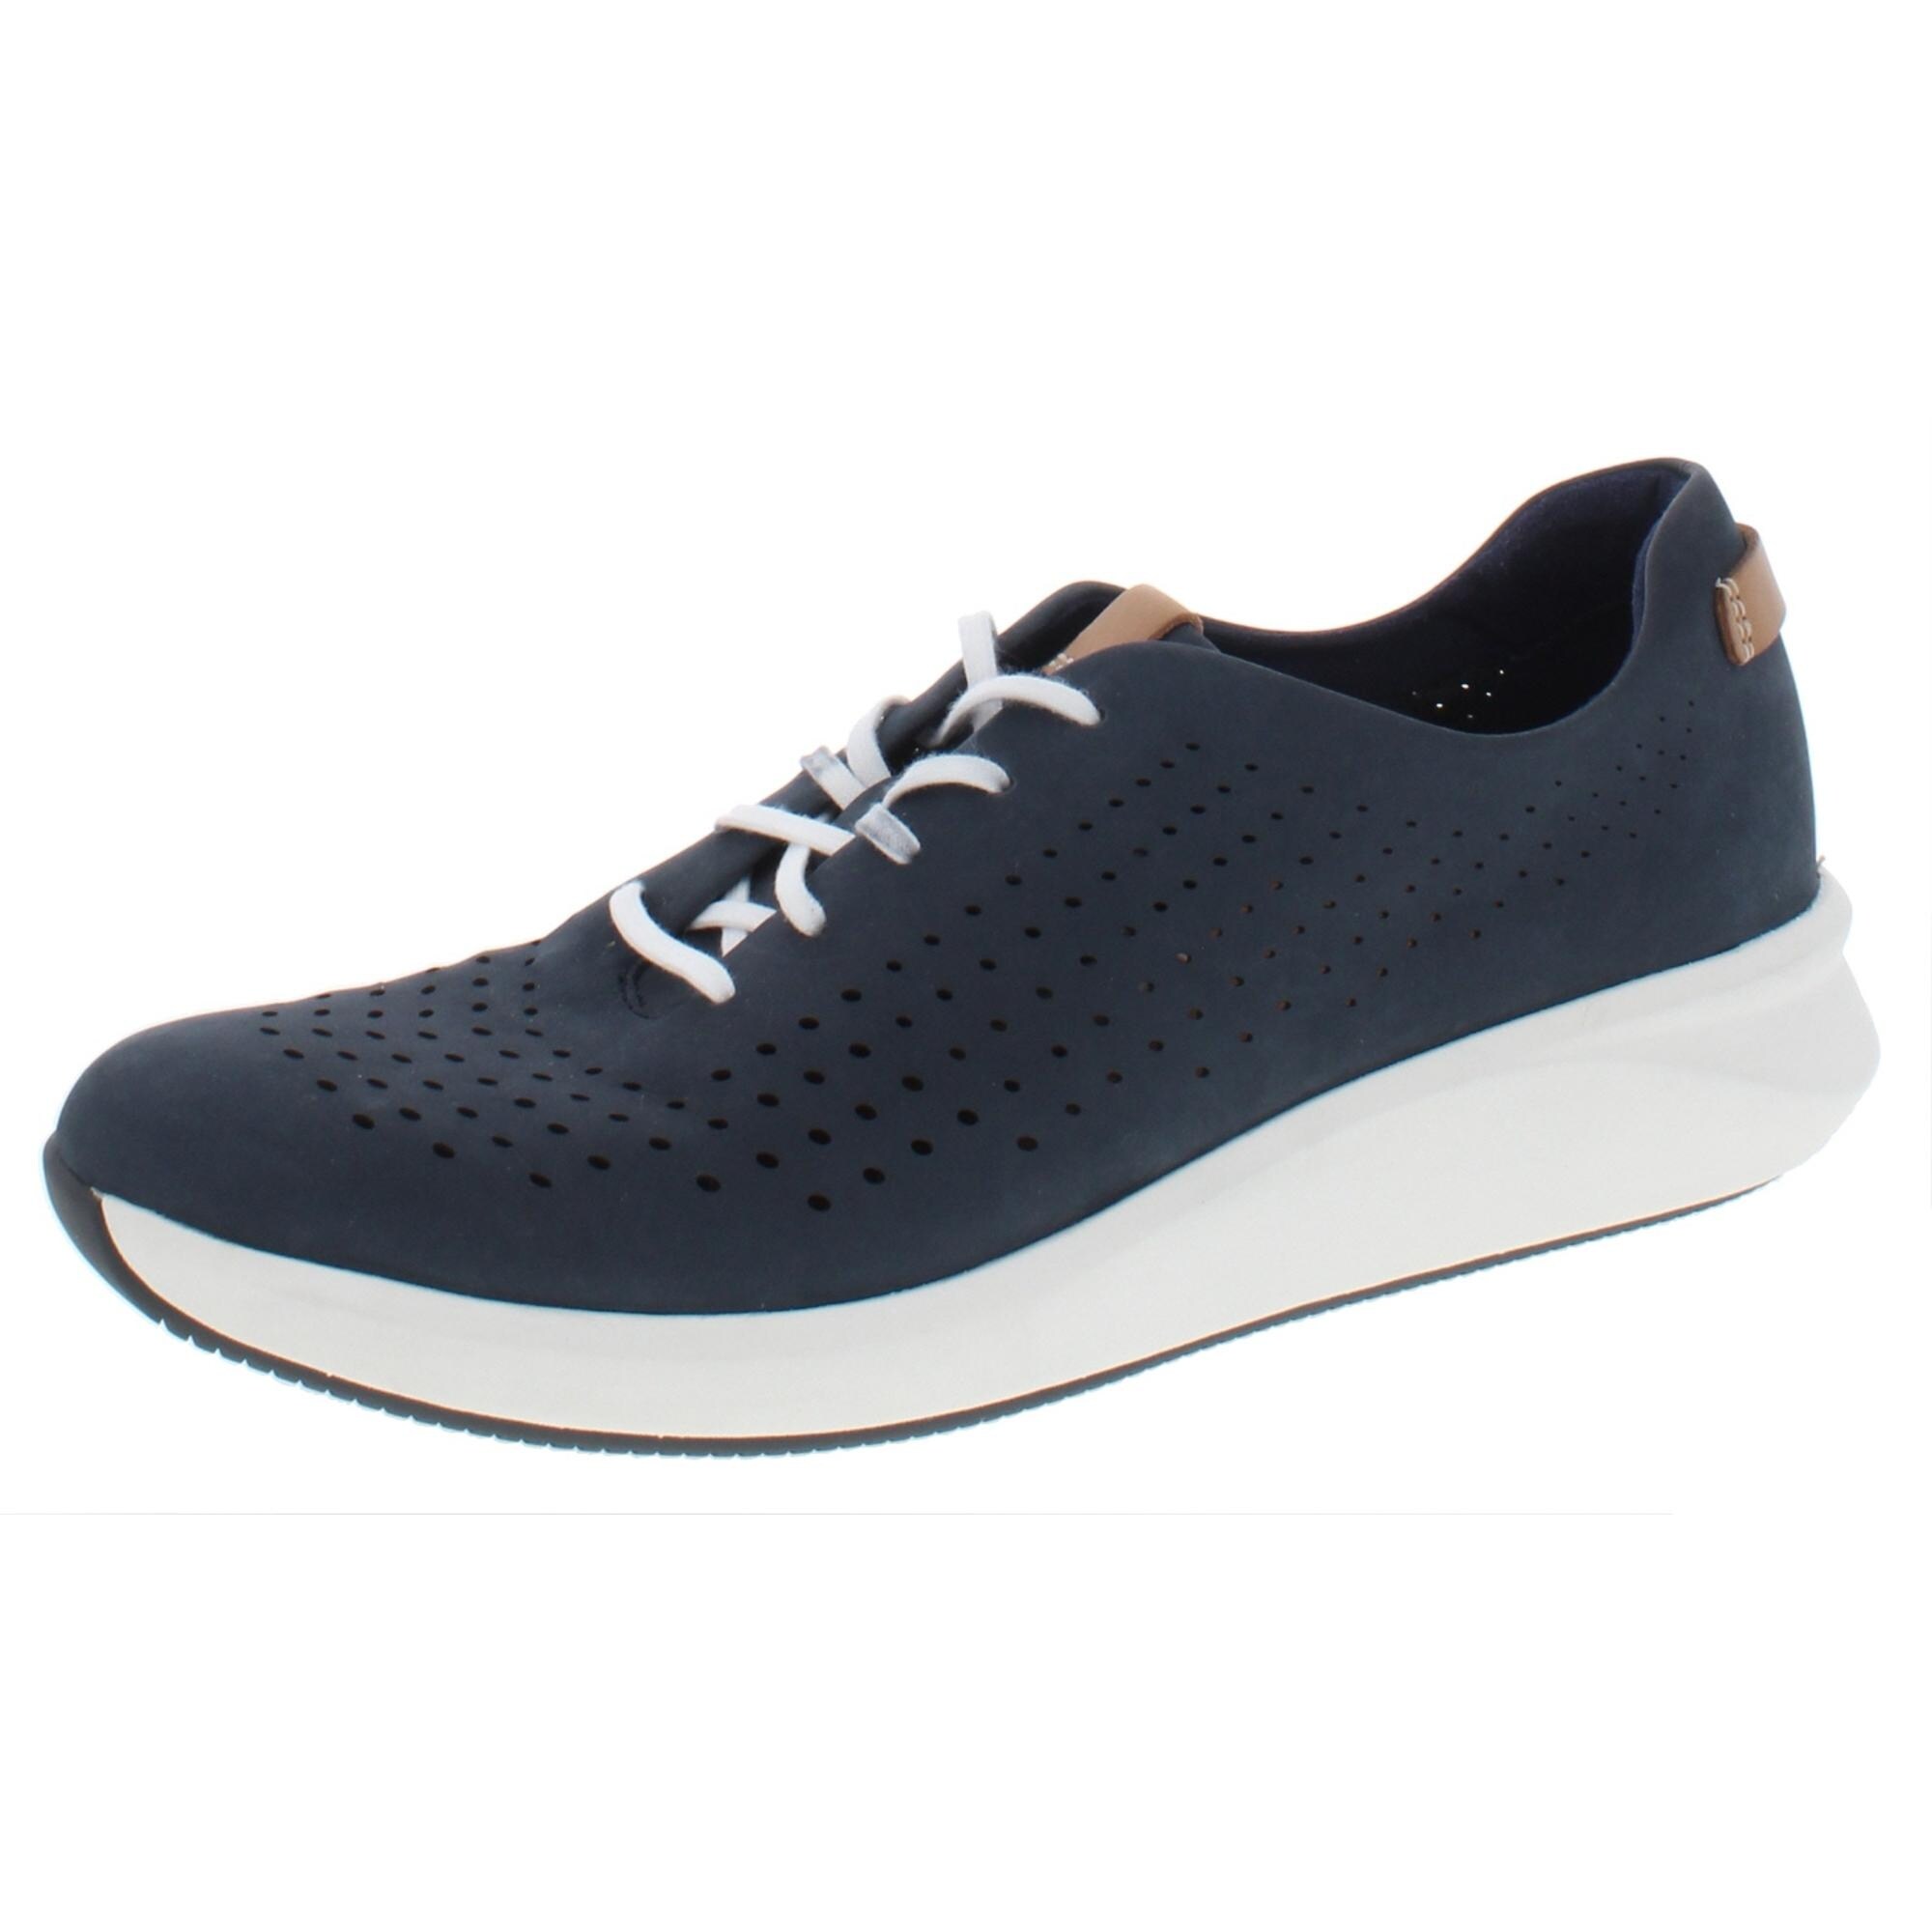 clarks womens tennis shoes